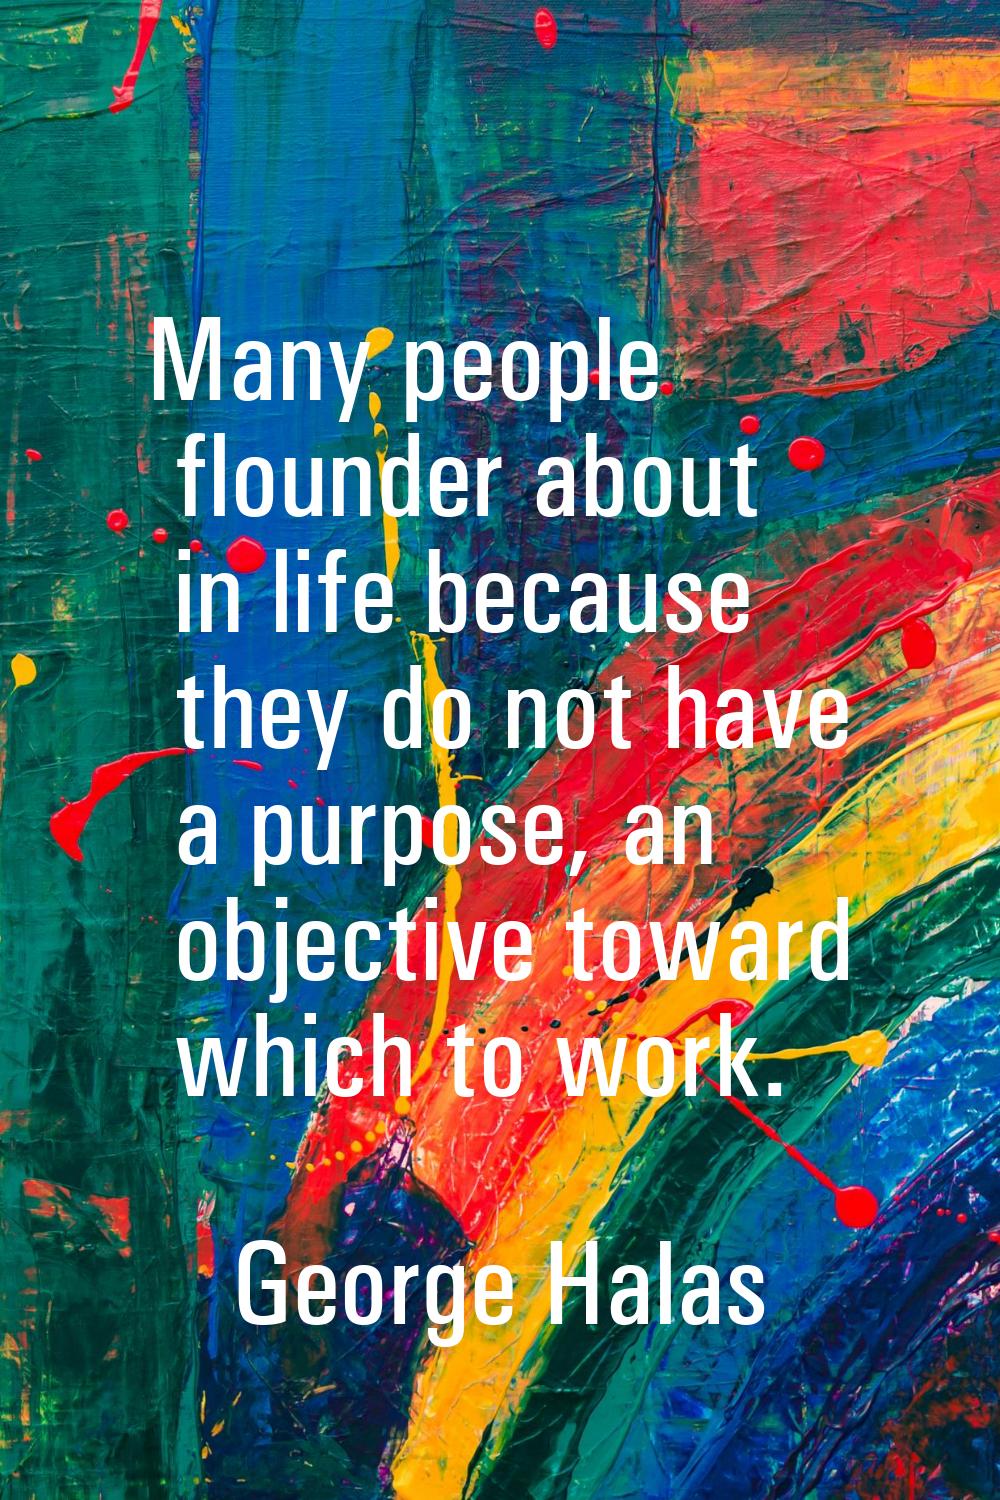 Many people flounder about in life because they do not have a purpose, an objective toward which to